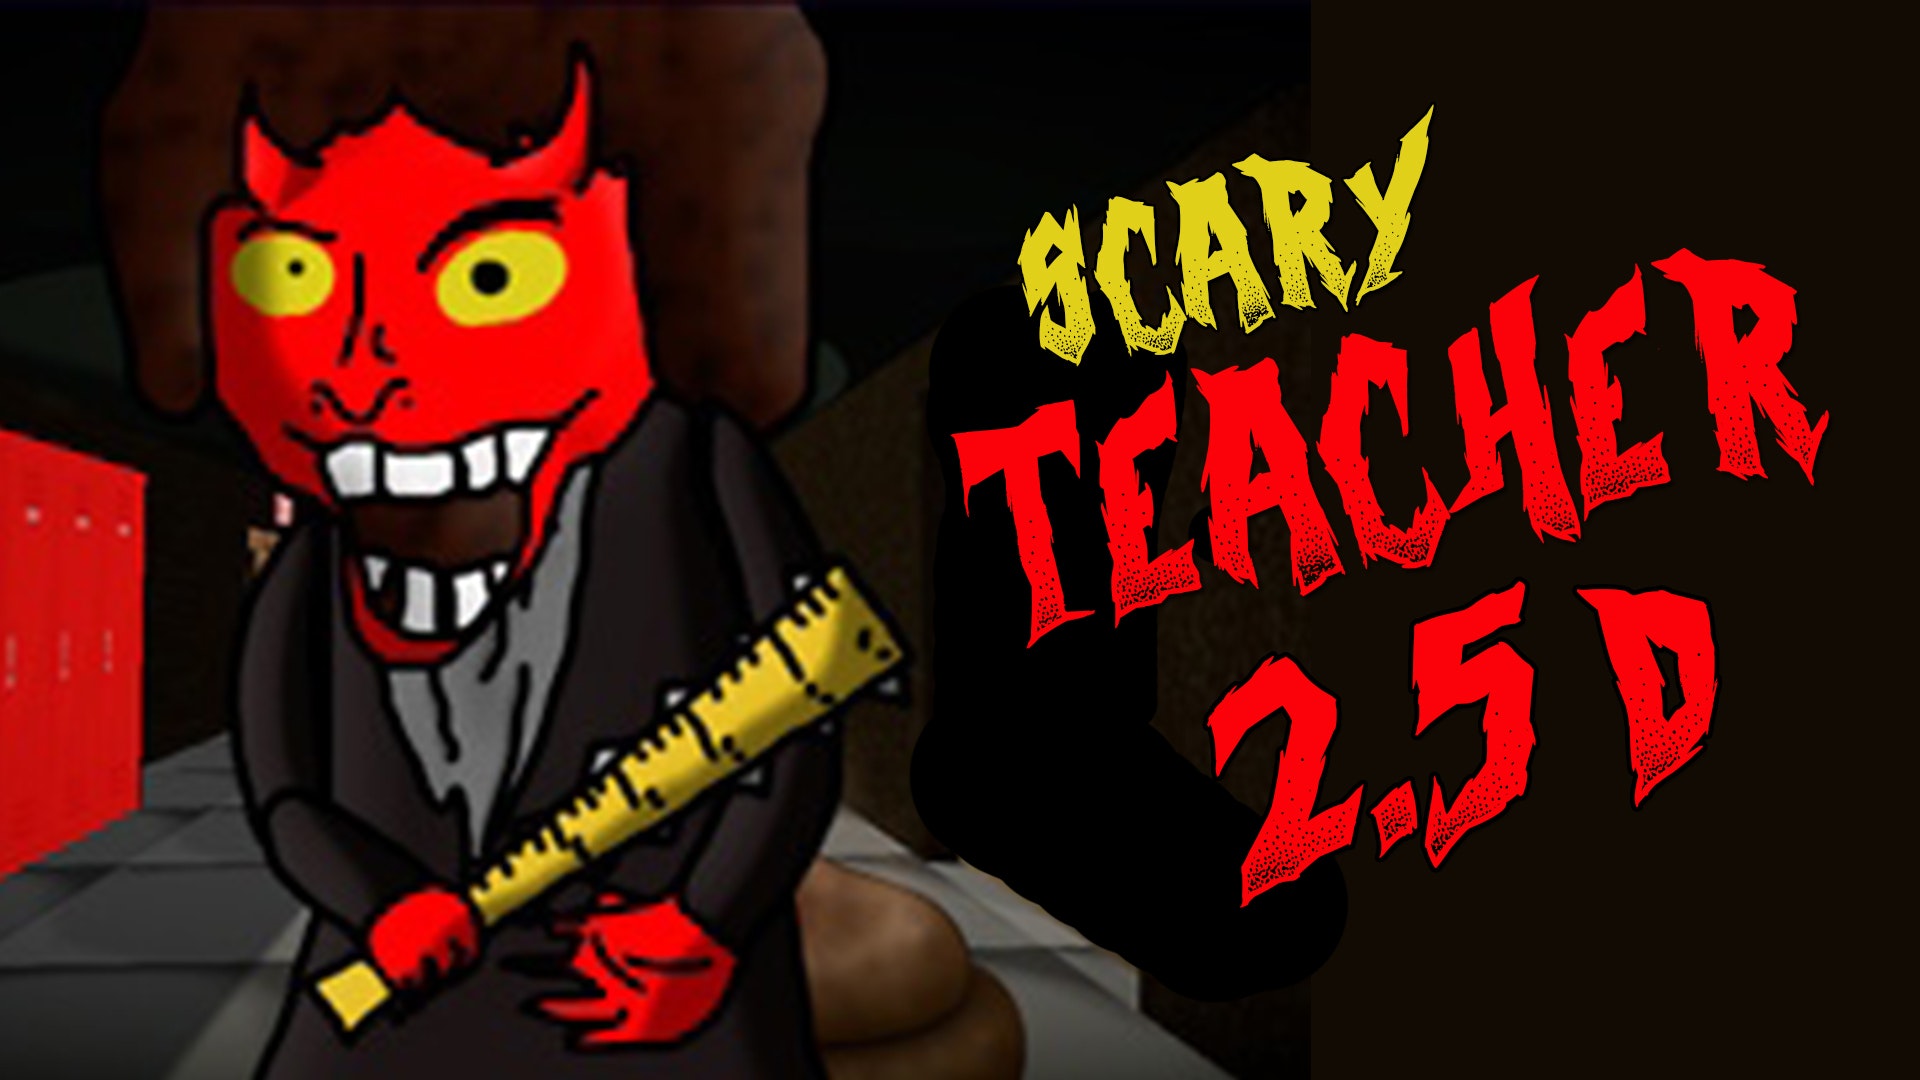 Trollface Quest: Horror 3 🕹️ Play on CrazyGames